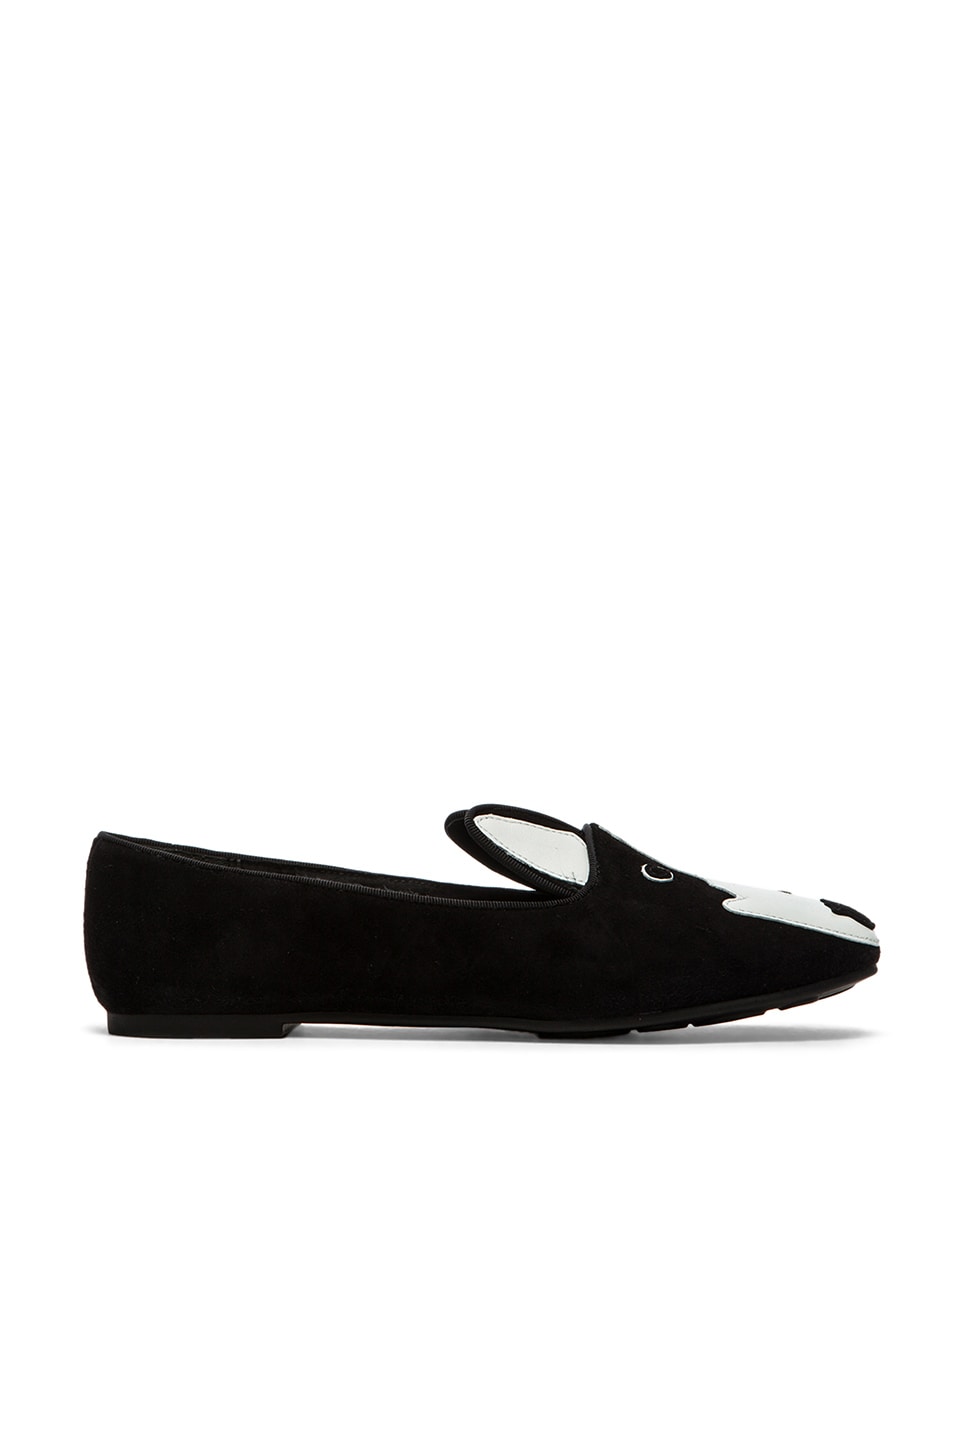 revolve loafers